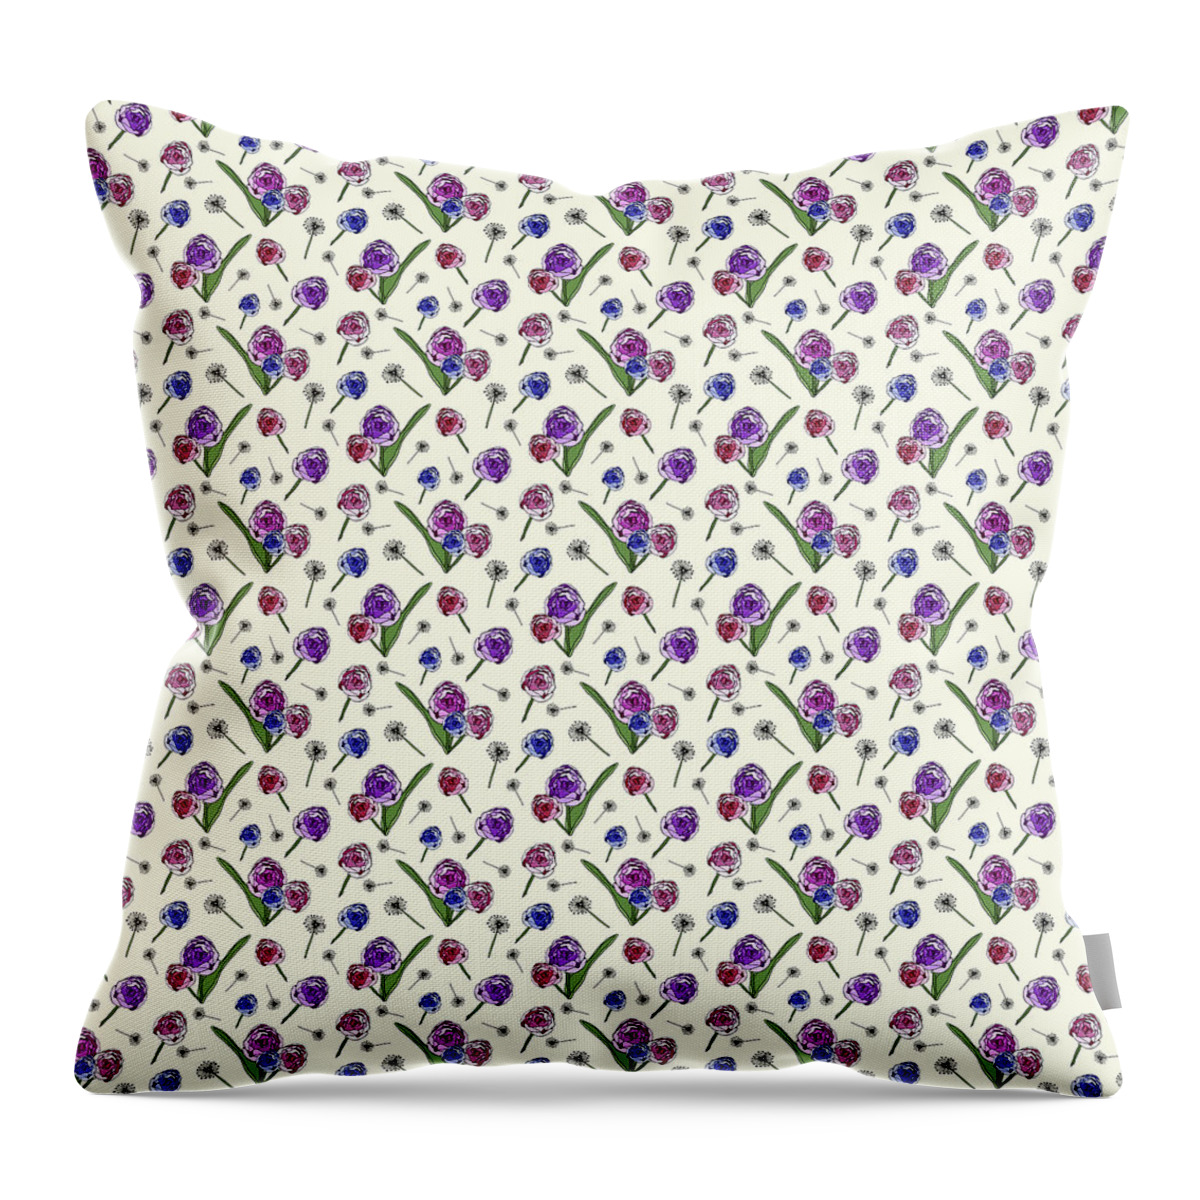  Throw Pillow featuring the digital art Garden Flowers Pattern - Large Scale by Lisa Blake